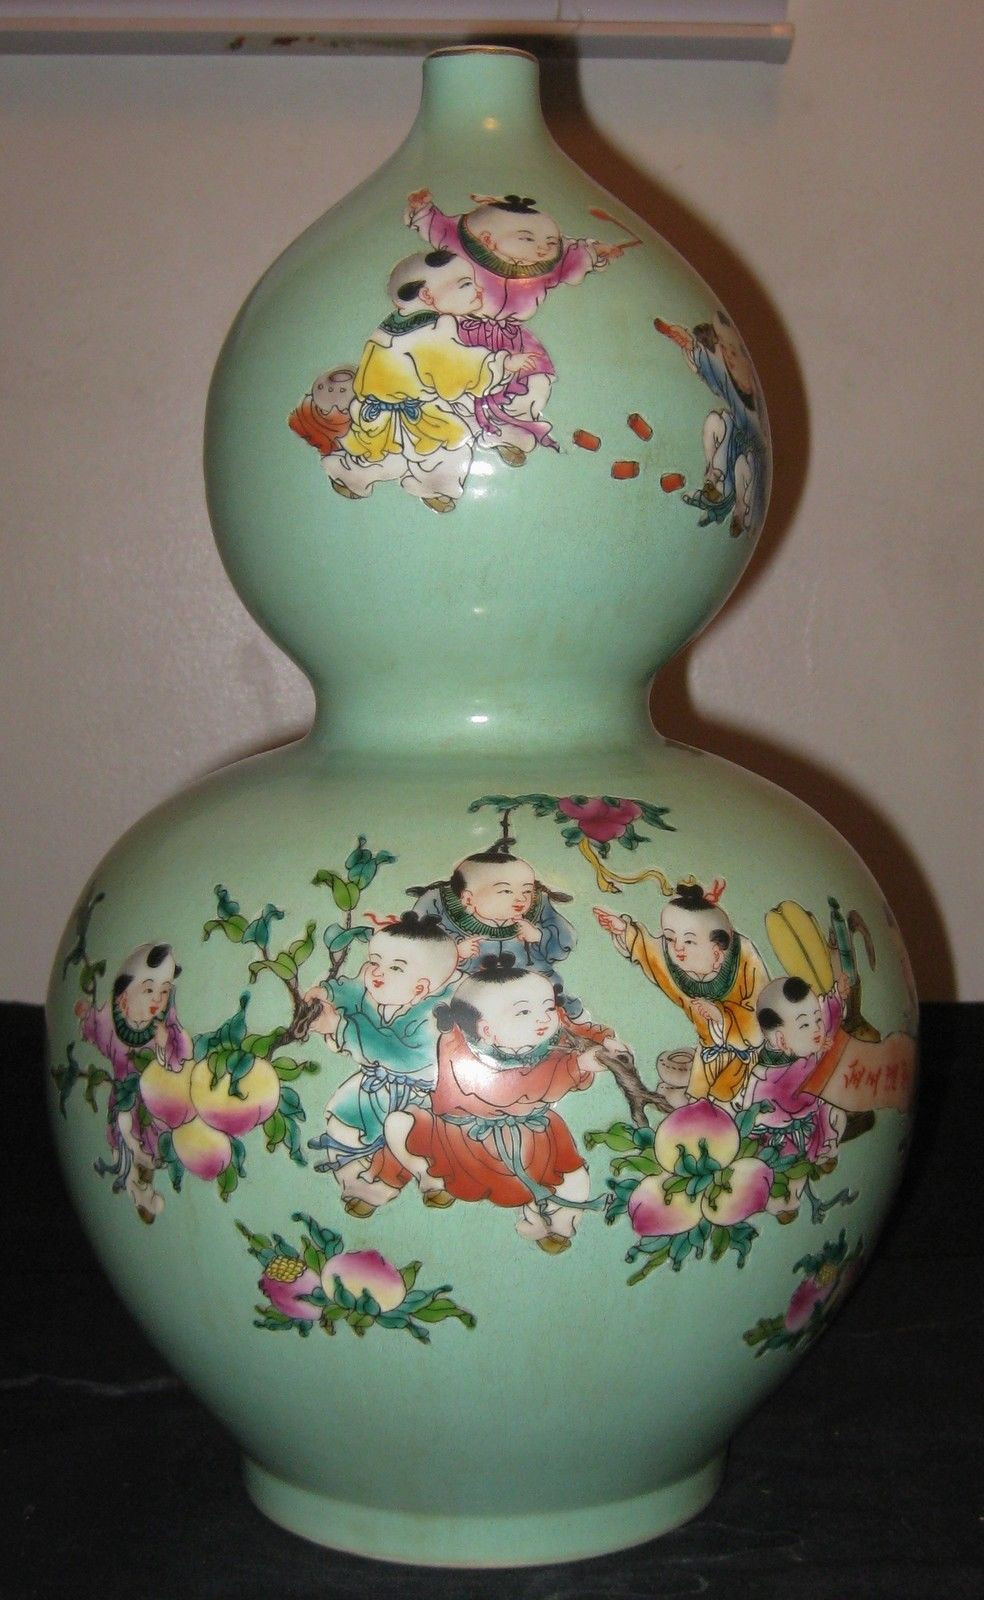 Big Chinese Vases for Sale Of Chinese Porcelain Celadon Ground Famille Rose Double Gourd Vase with Chinese Porcelain Celadon Ground Famille Rose Double Gourd Vase 19th Century